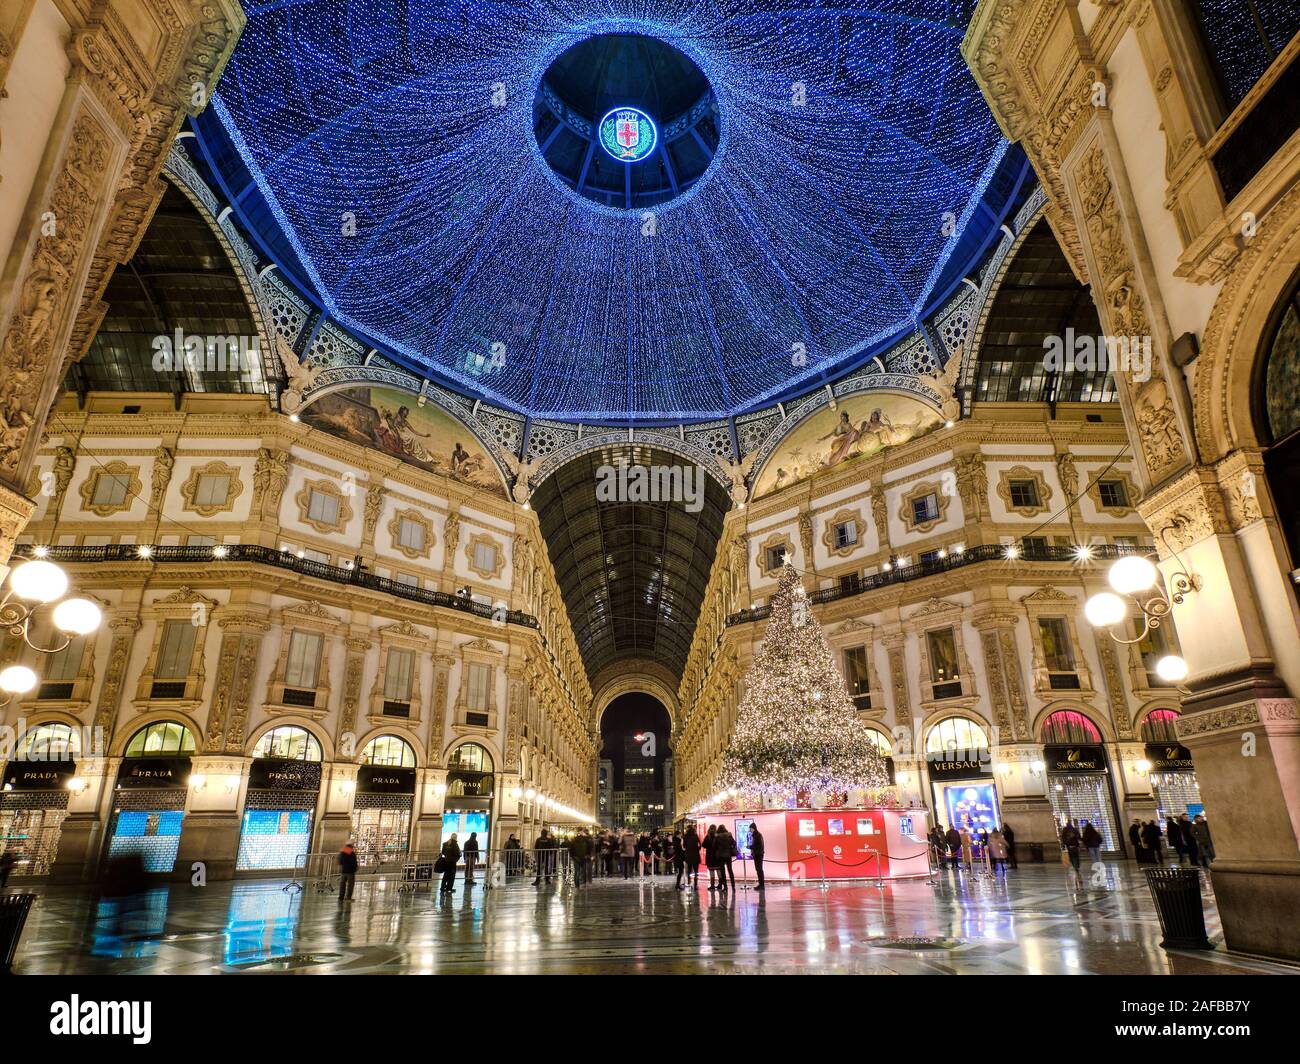 Milan, Italy - December 10 2019: The dome of Galleria Vittorio Emanuele II shopping mall illuminated for Christmas, Italy Stock Photo